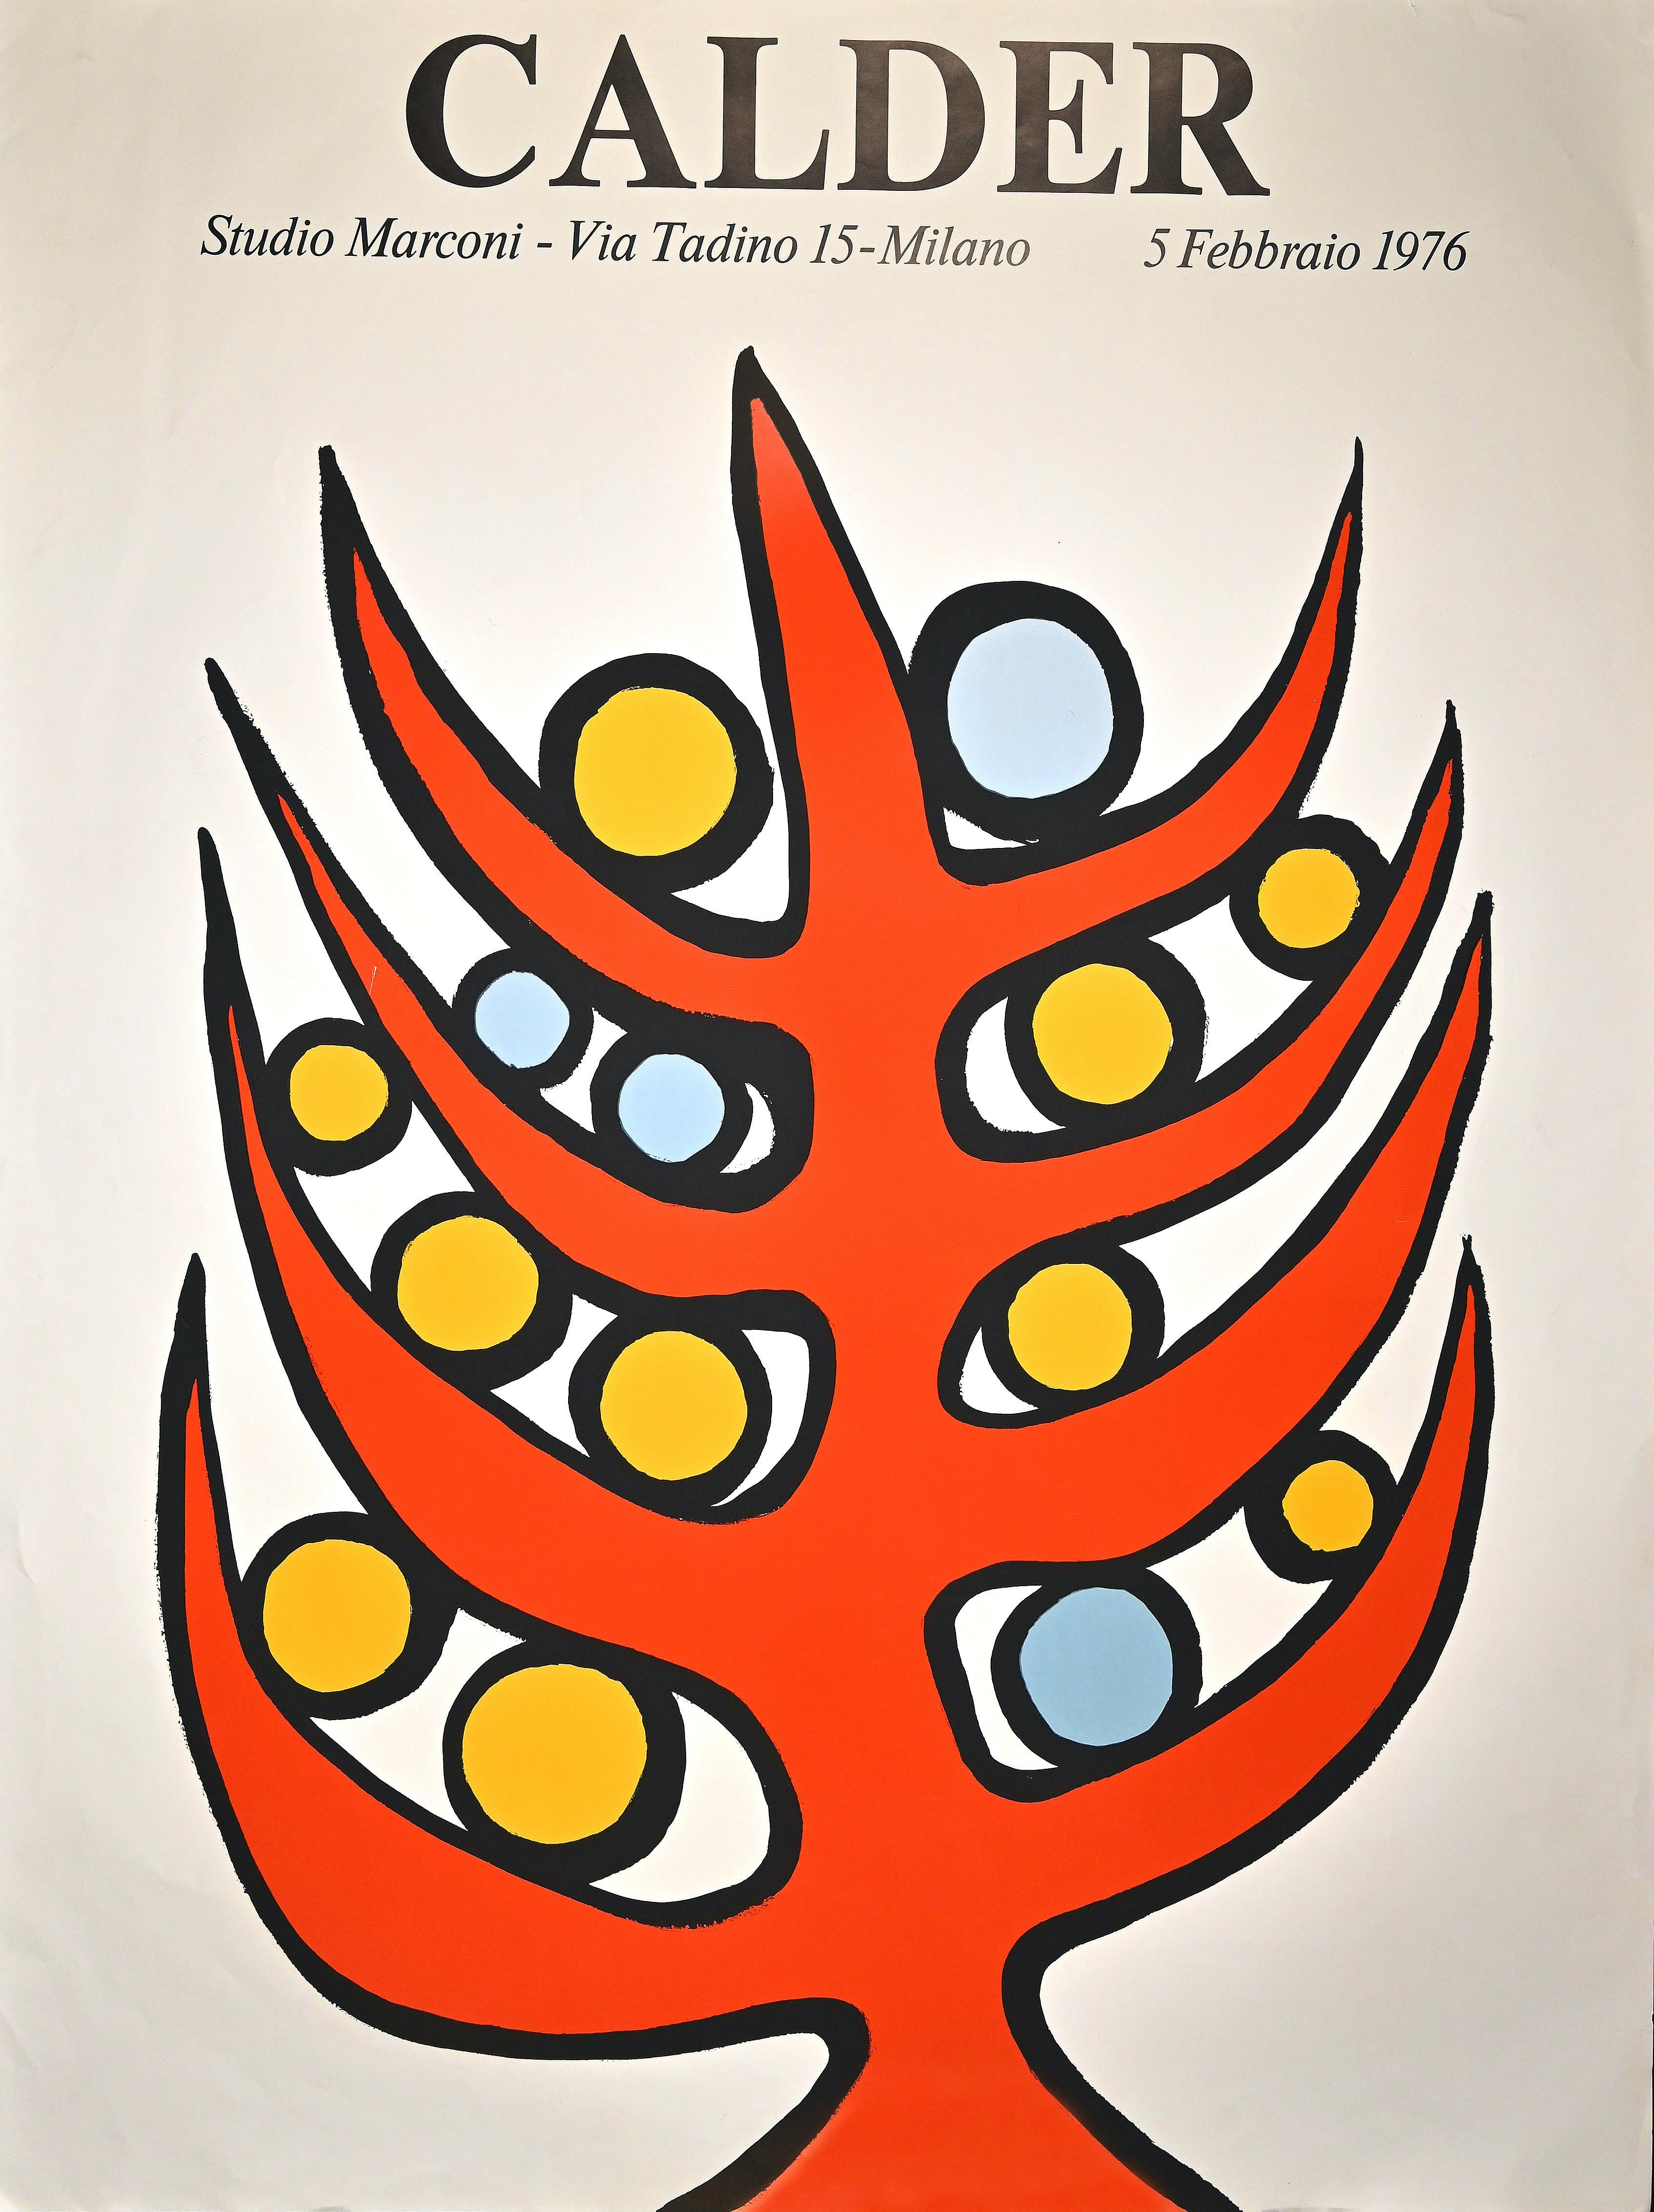 Calder Exhibition Poster is realized after Alexander Calder for his personal exhibition in 1976

Good conditions except for some light folds and tears.

This beautiful and coloured print was realized on the occasion of the exhibition of the artist